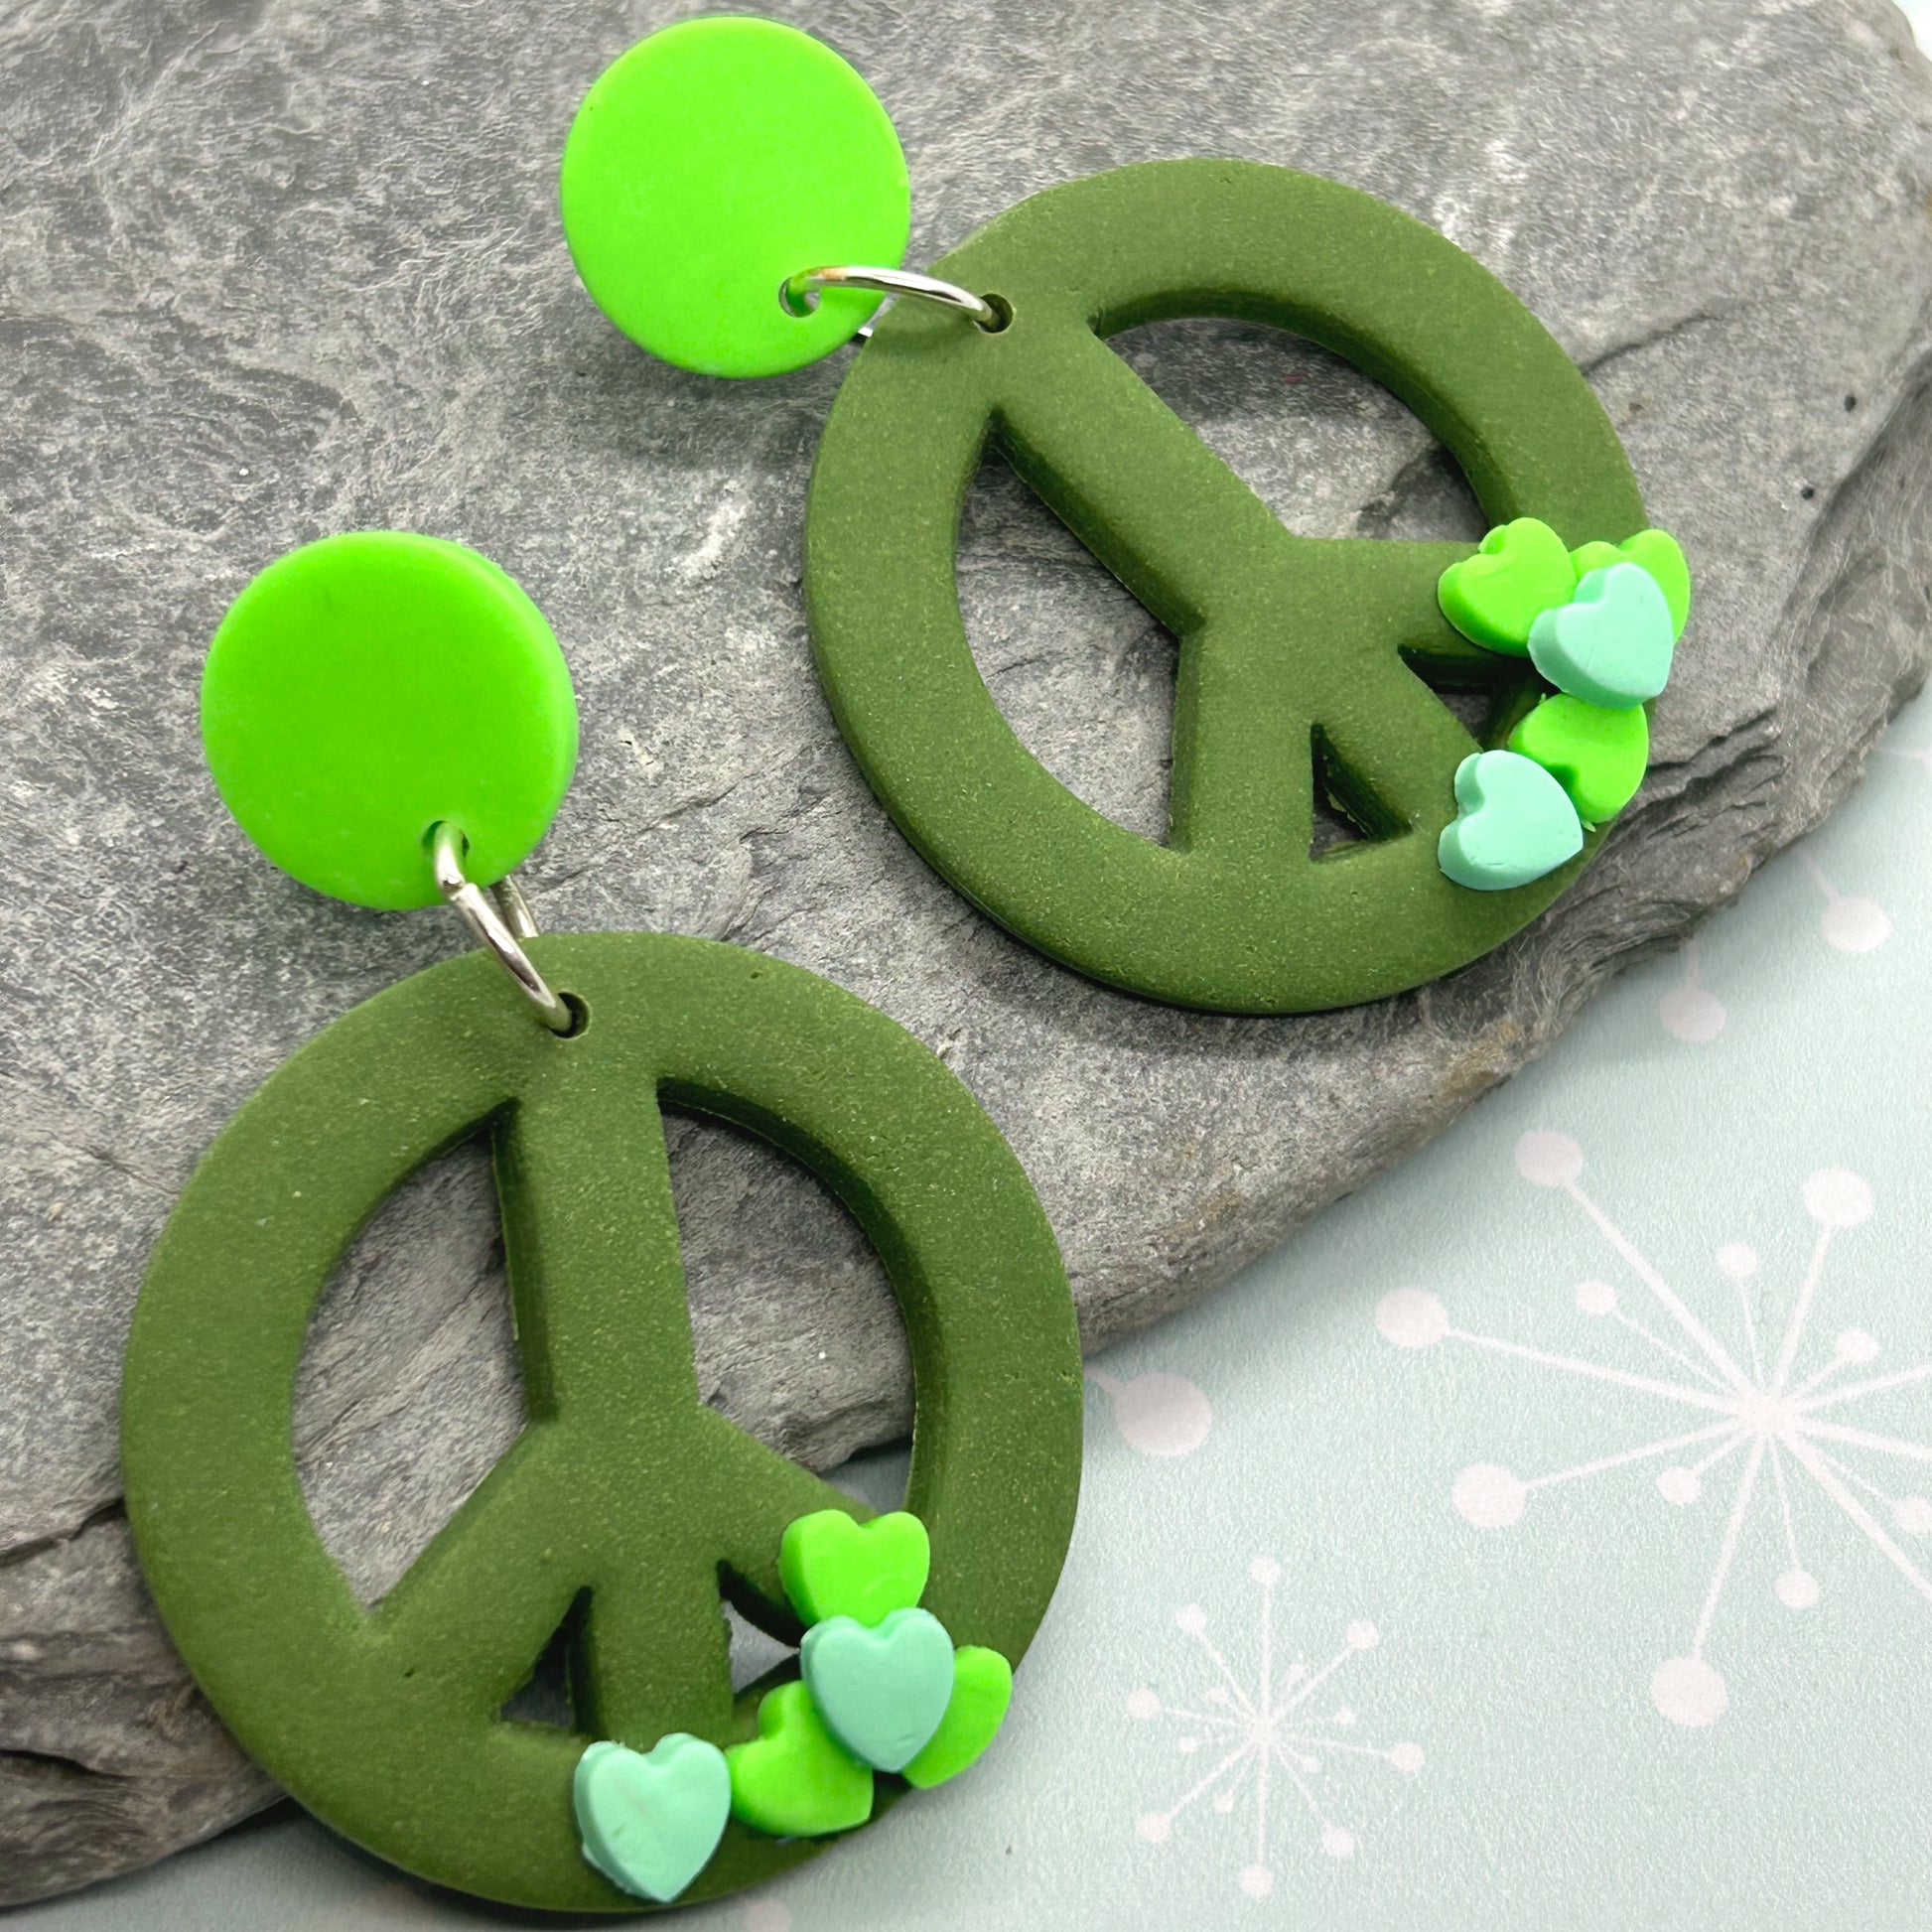 Bruce - peace love and harmony earrings - The Argentum Design Co